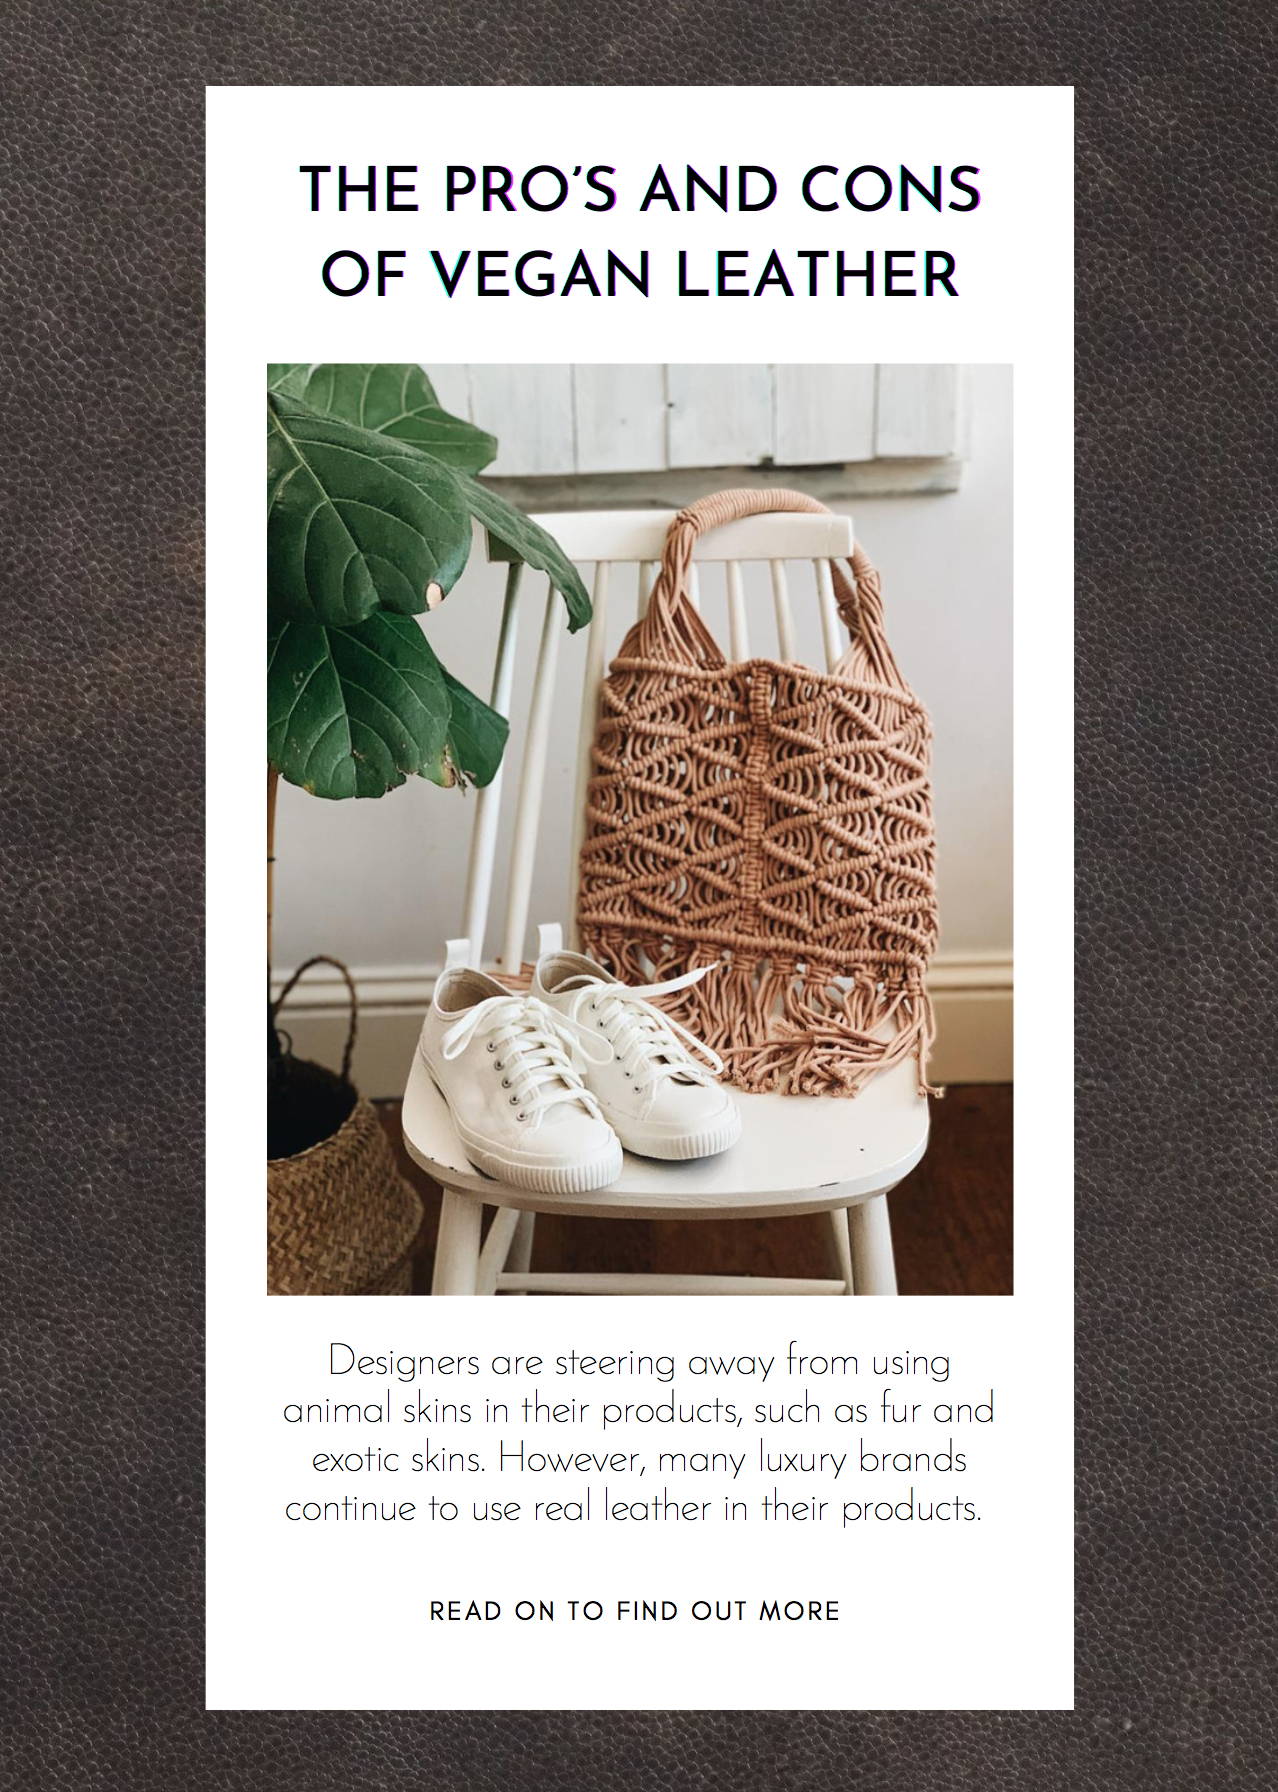 The Pro’s and Cons of Vegan Leather